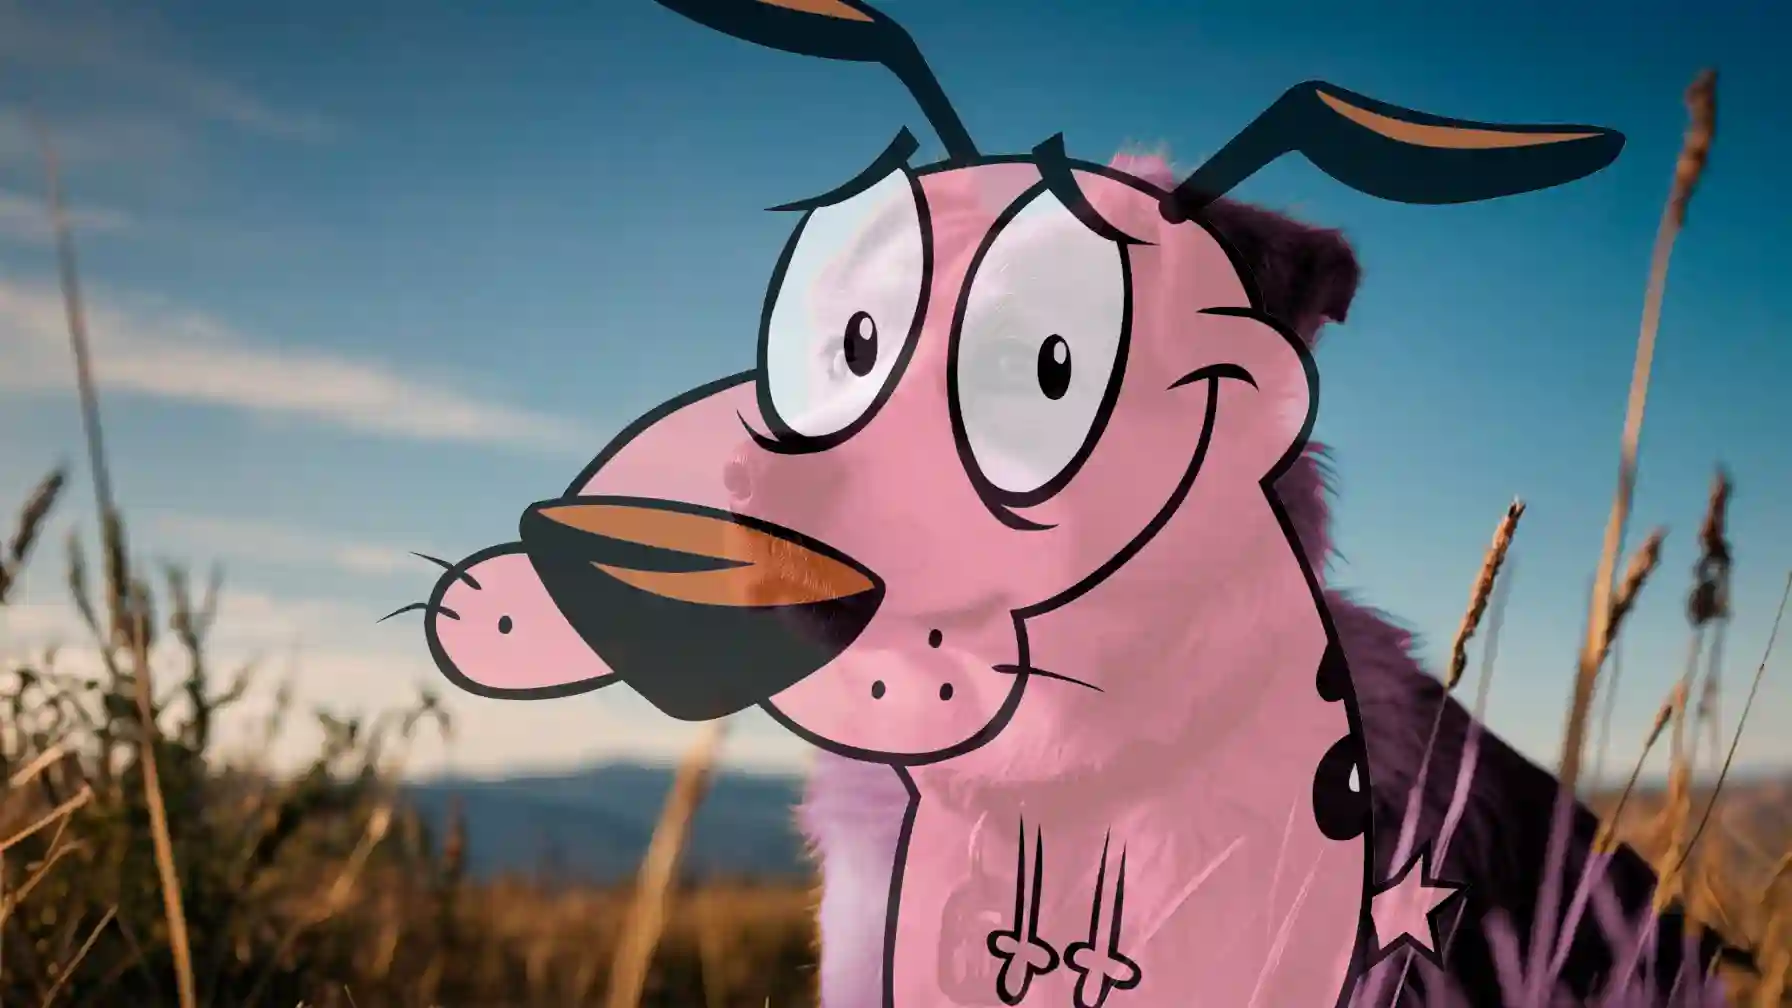 Courage the Cowardly Dog: From Pixelated Protector to Real Life with IA